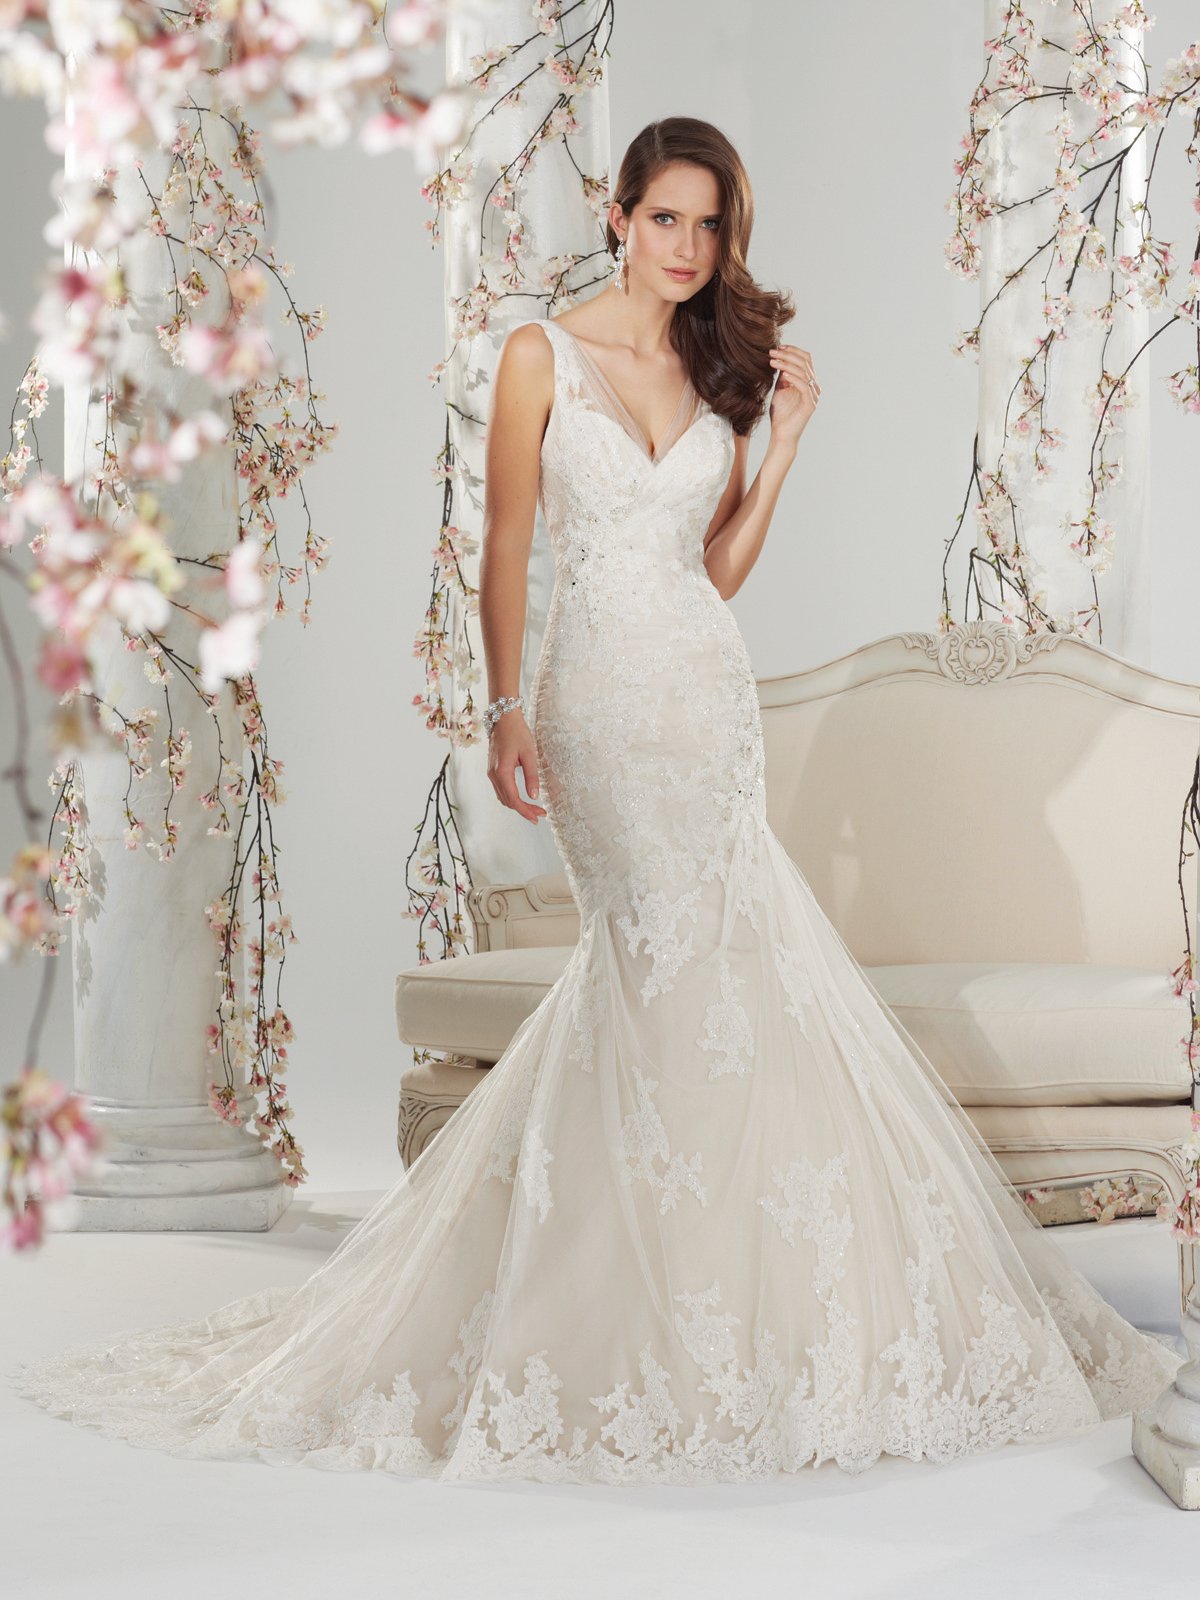 Sophia Tolli 2014 Bridal Collection - World inside pictures